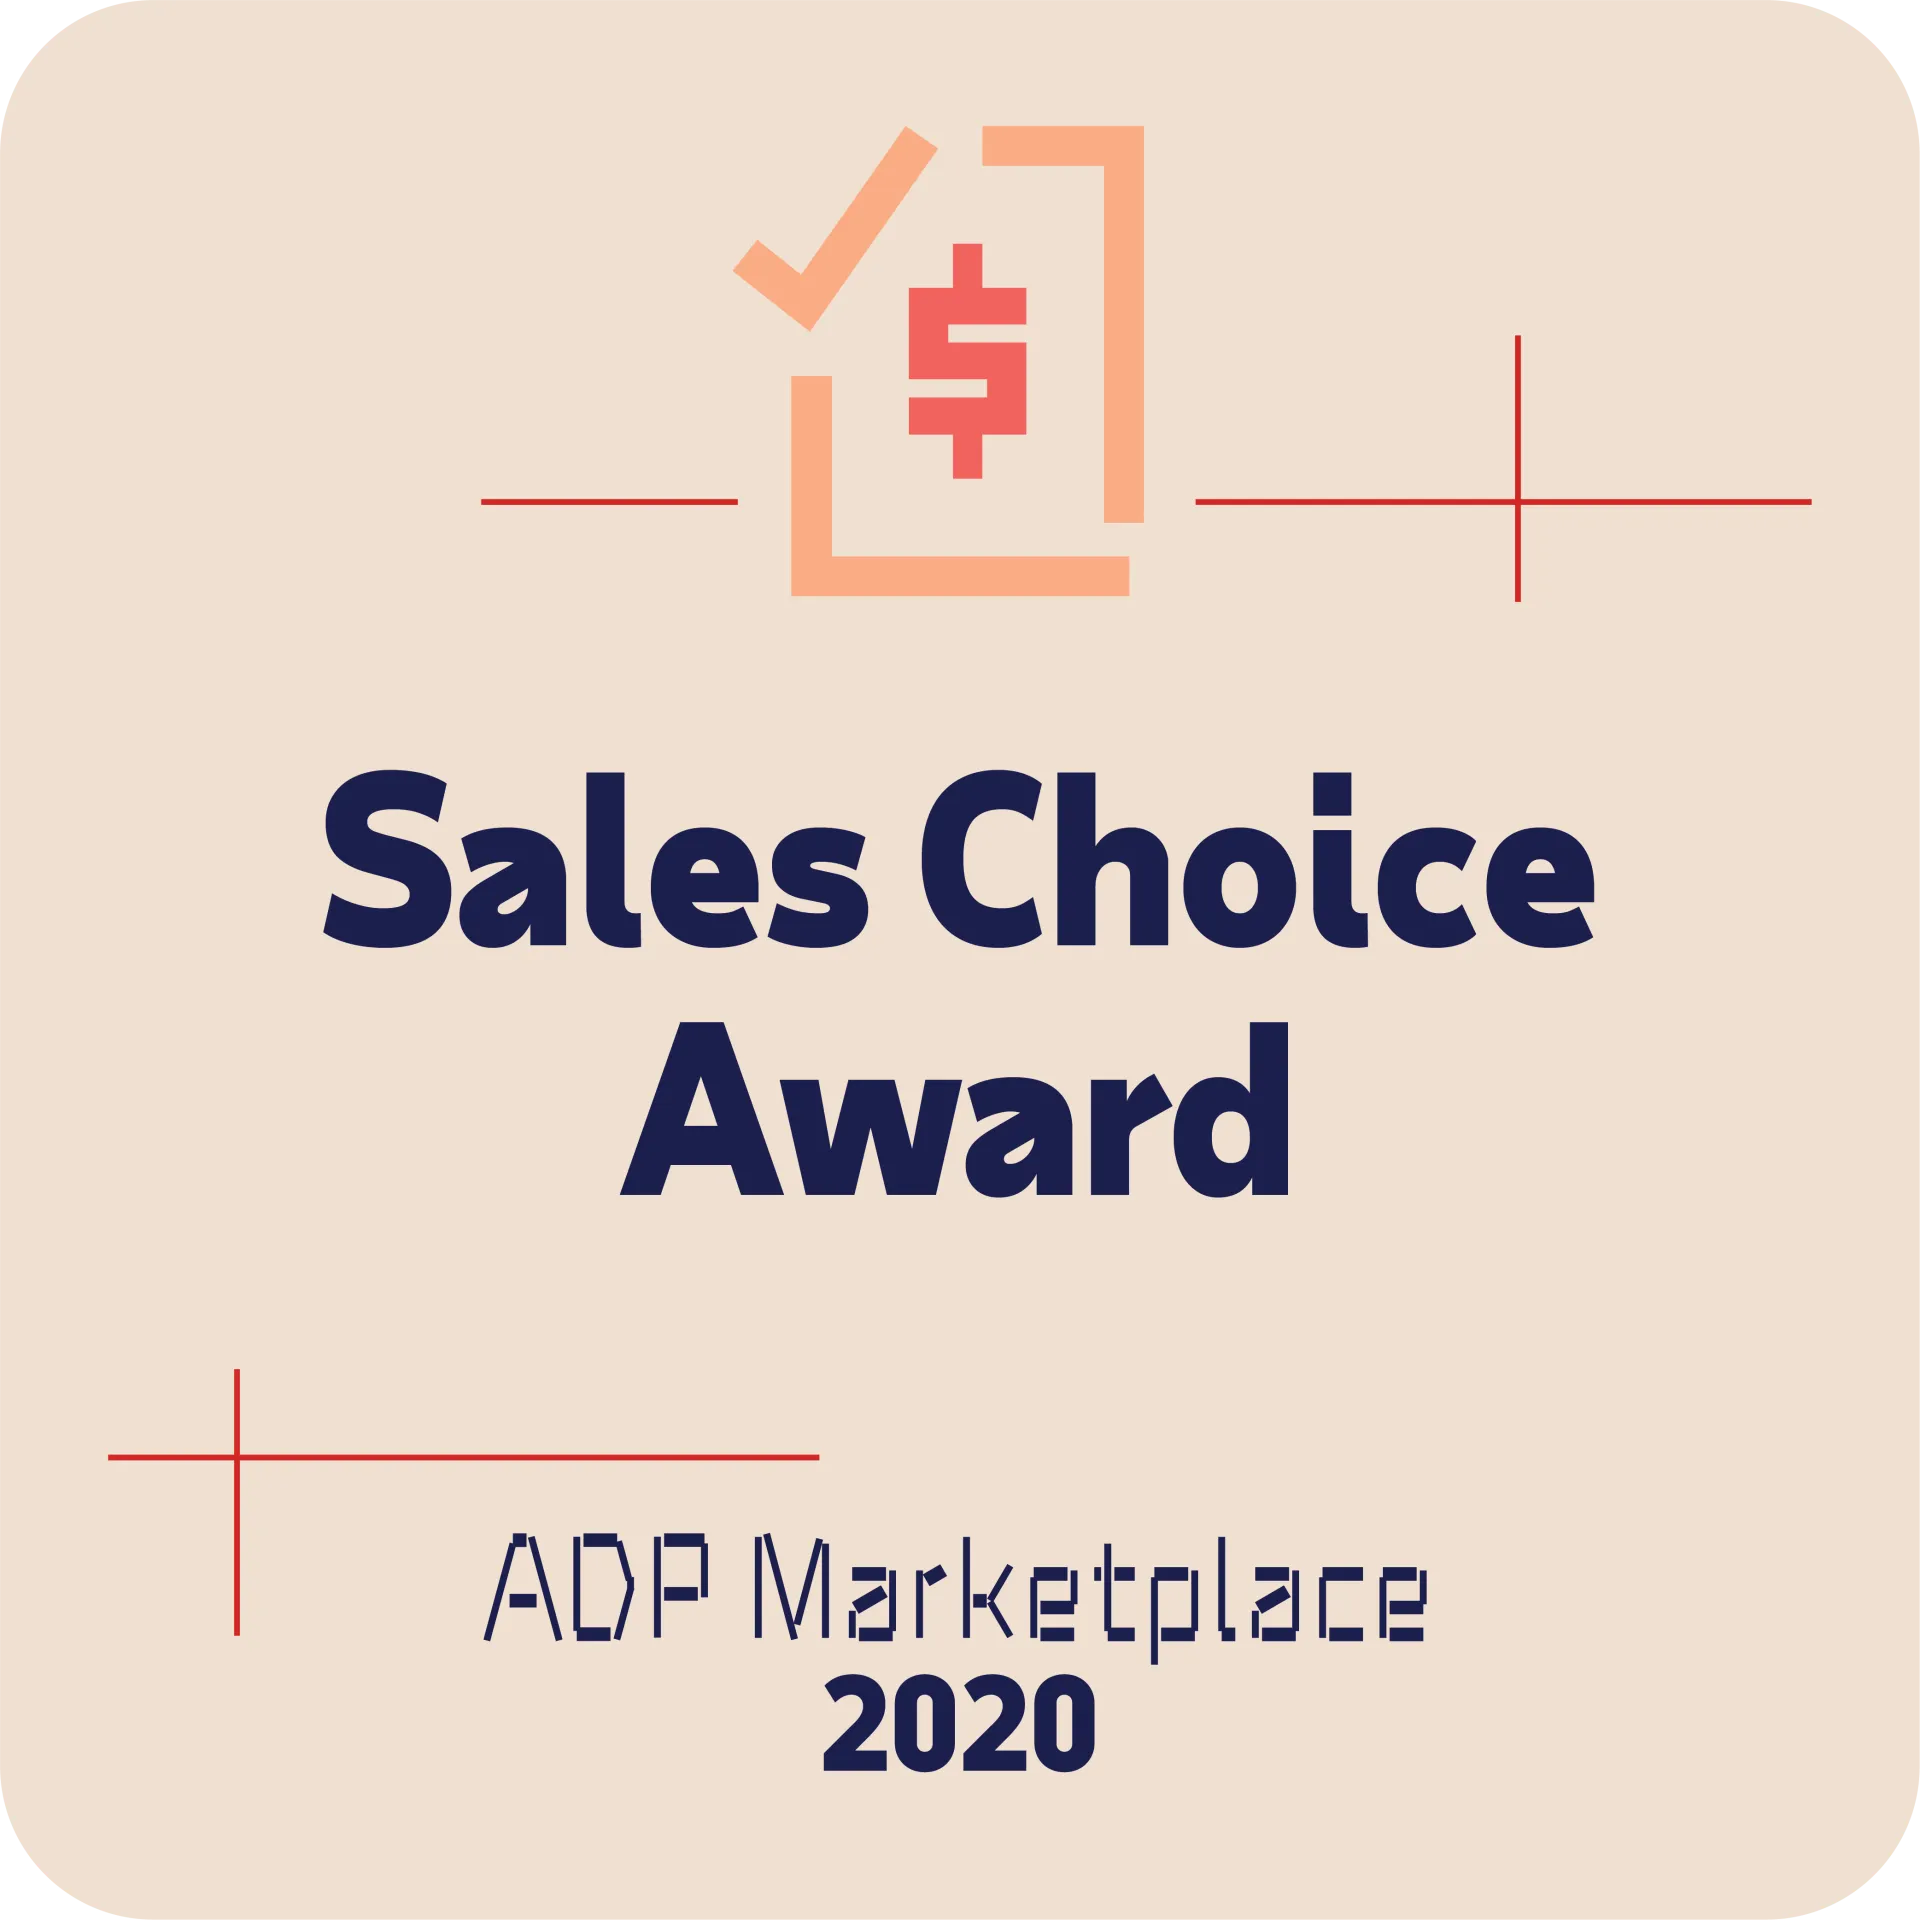 Points North Honored with Top Sales Award for 2020